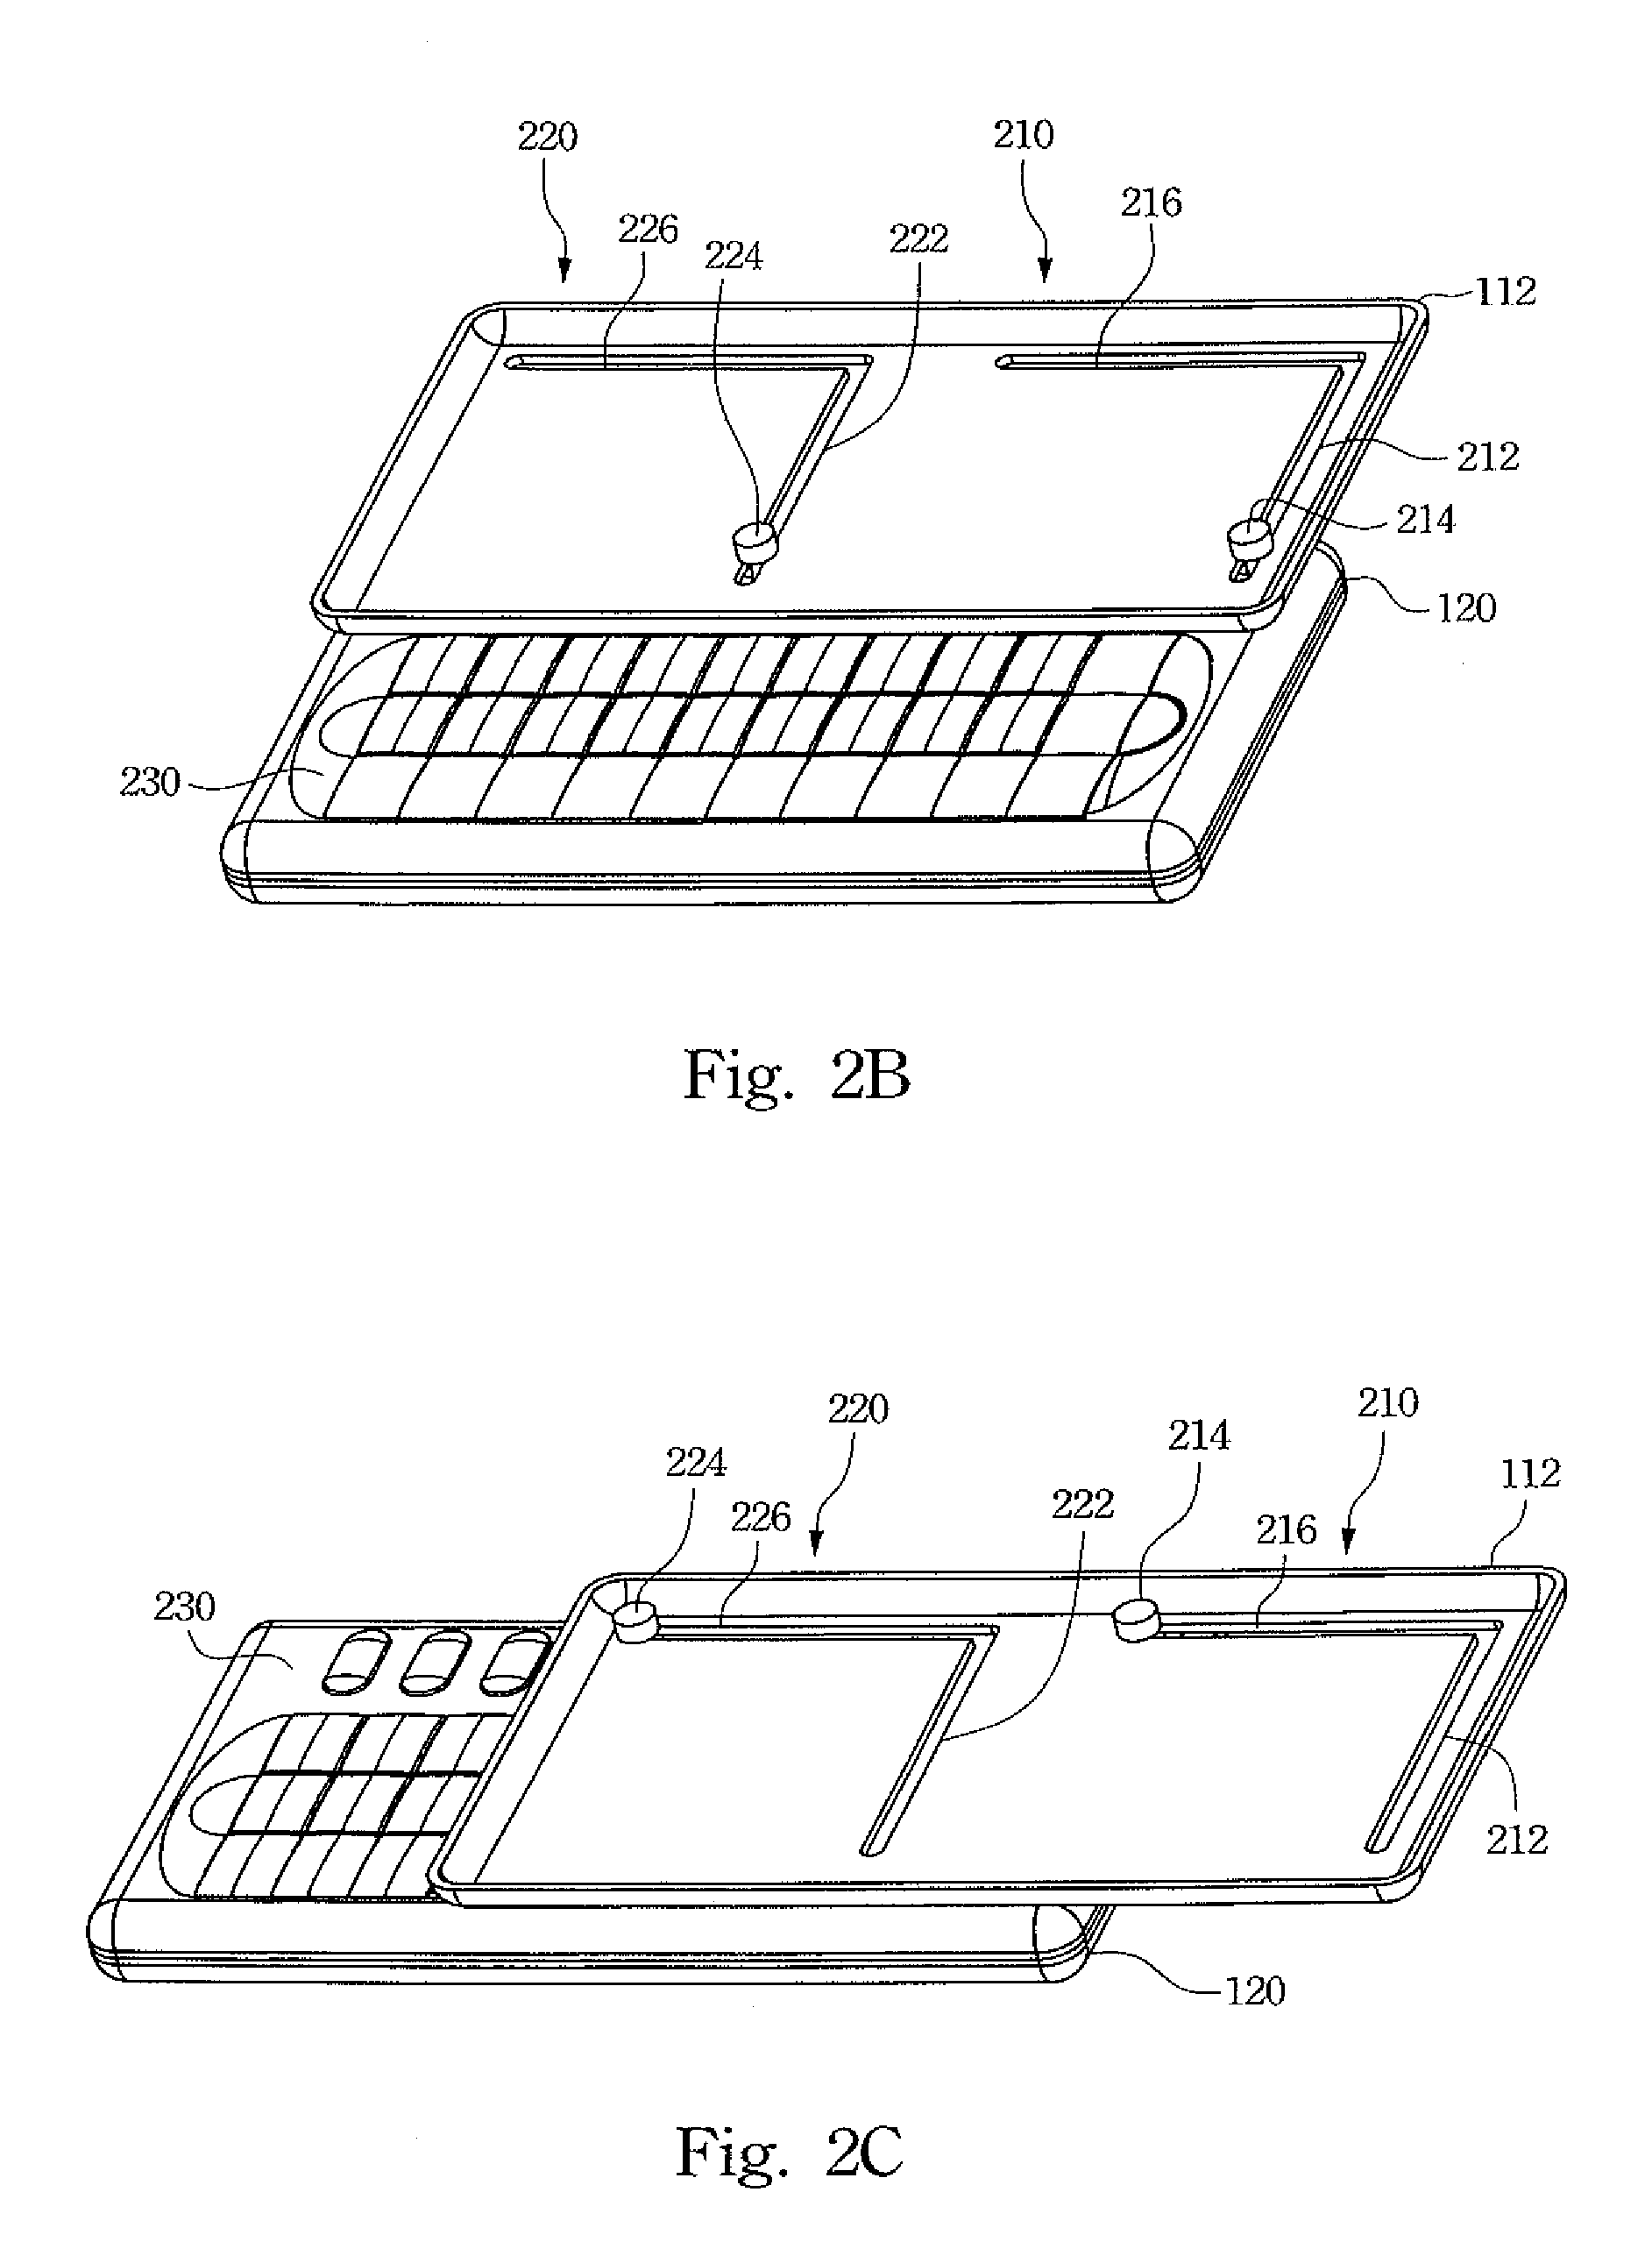 Multi-directional sliding module and application thereof